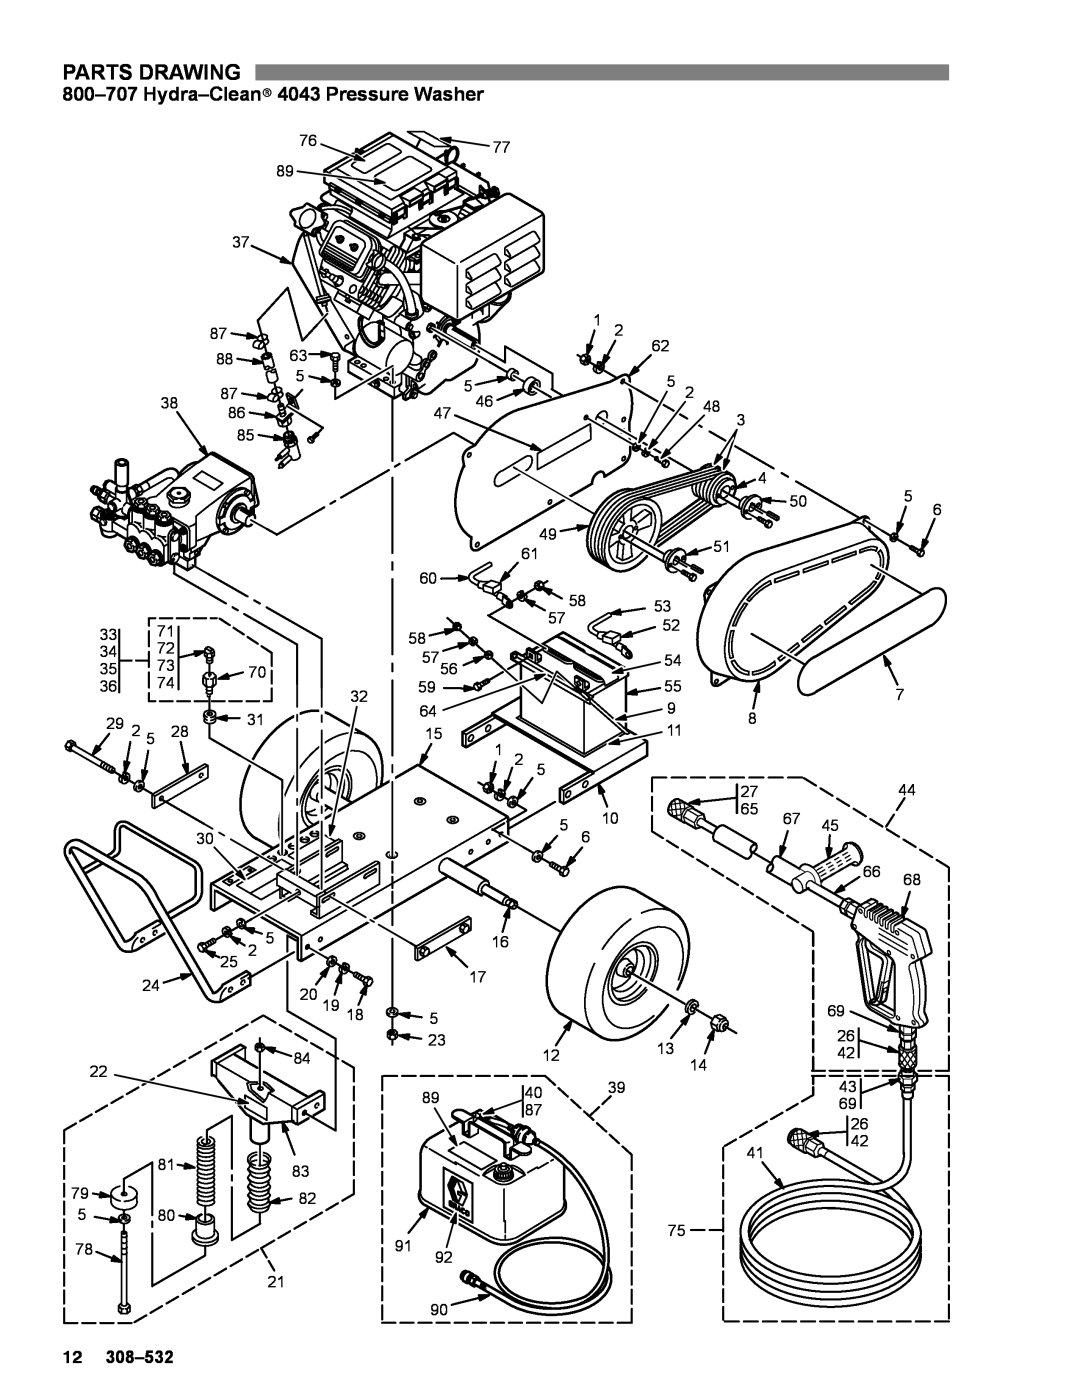 Graco Inc 800-707, 800-706, 308-532 manual Hydra-Cleanr 4043 Pressure Washer, Parts Drawing 